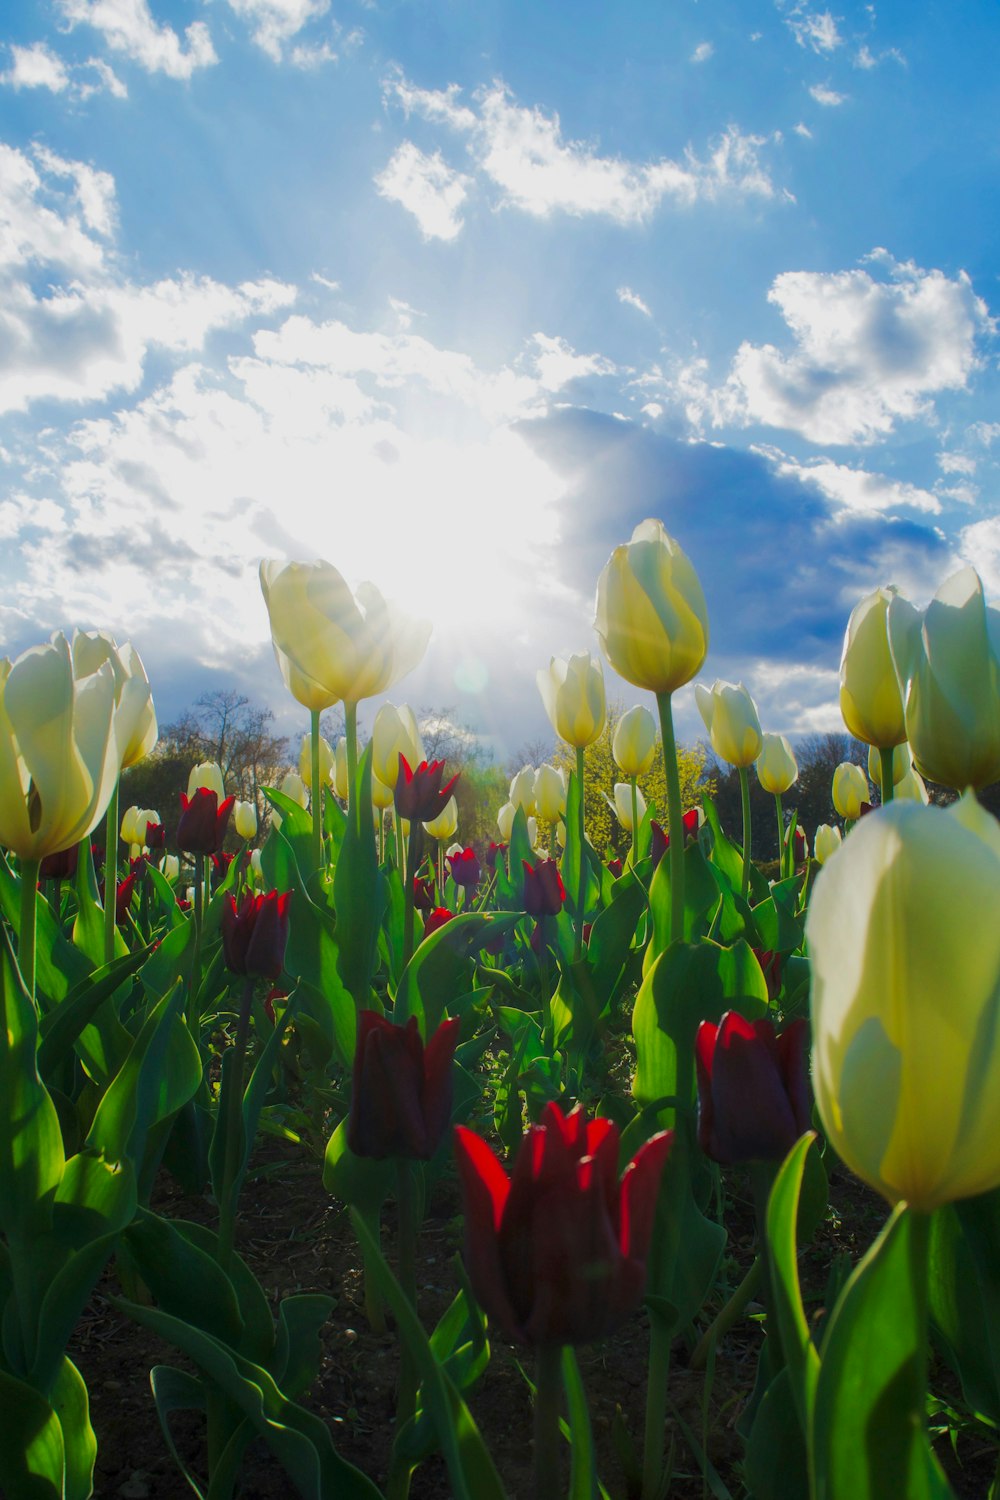 a field full of yellow and red tulips under a blue sky